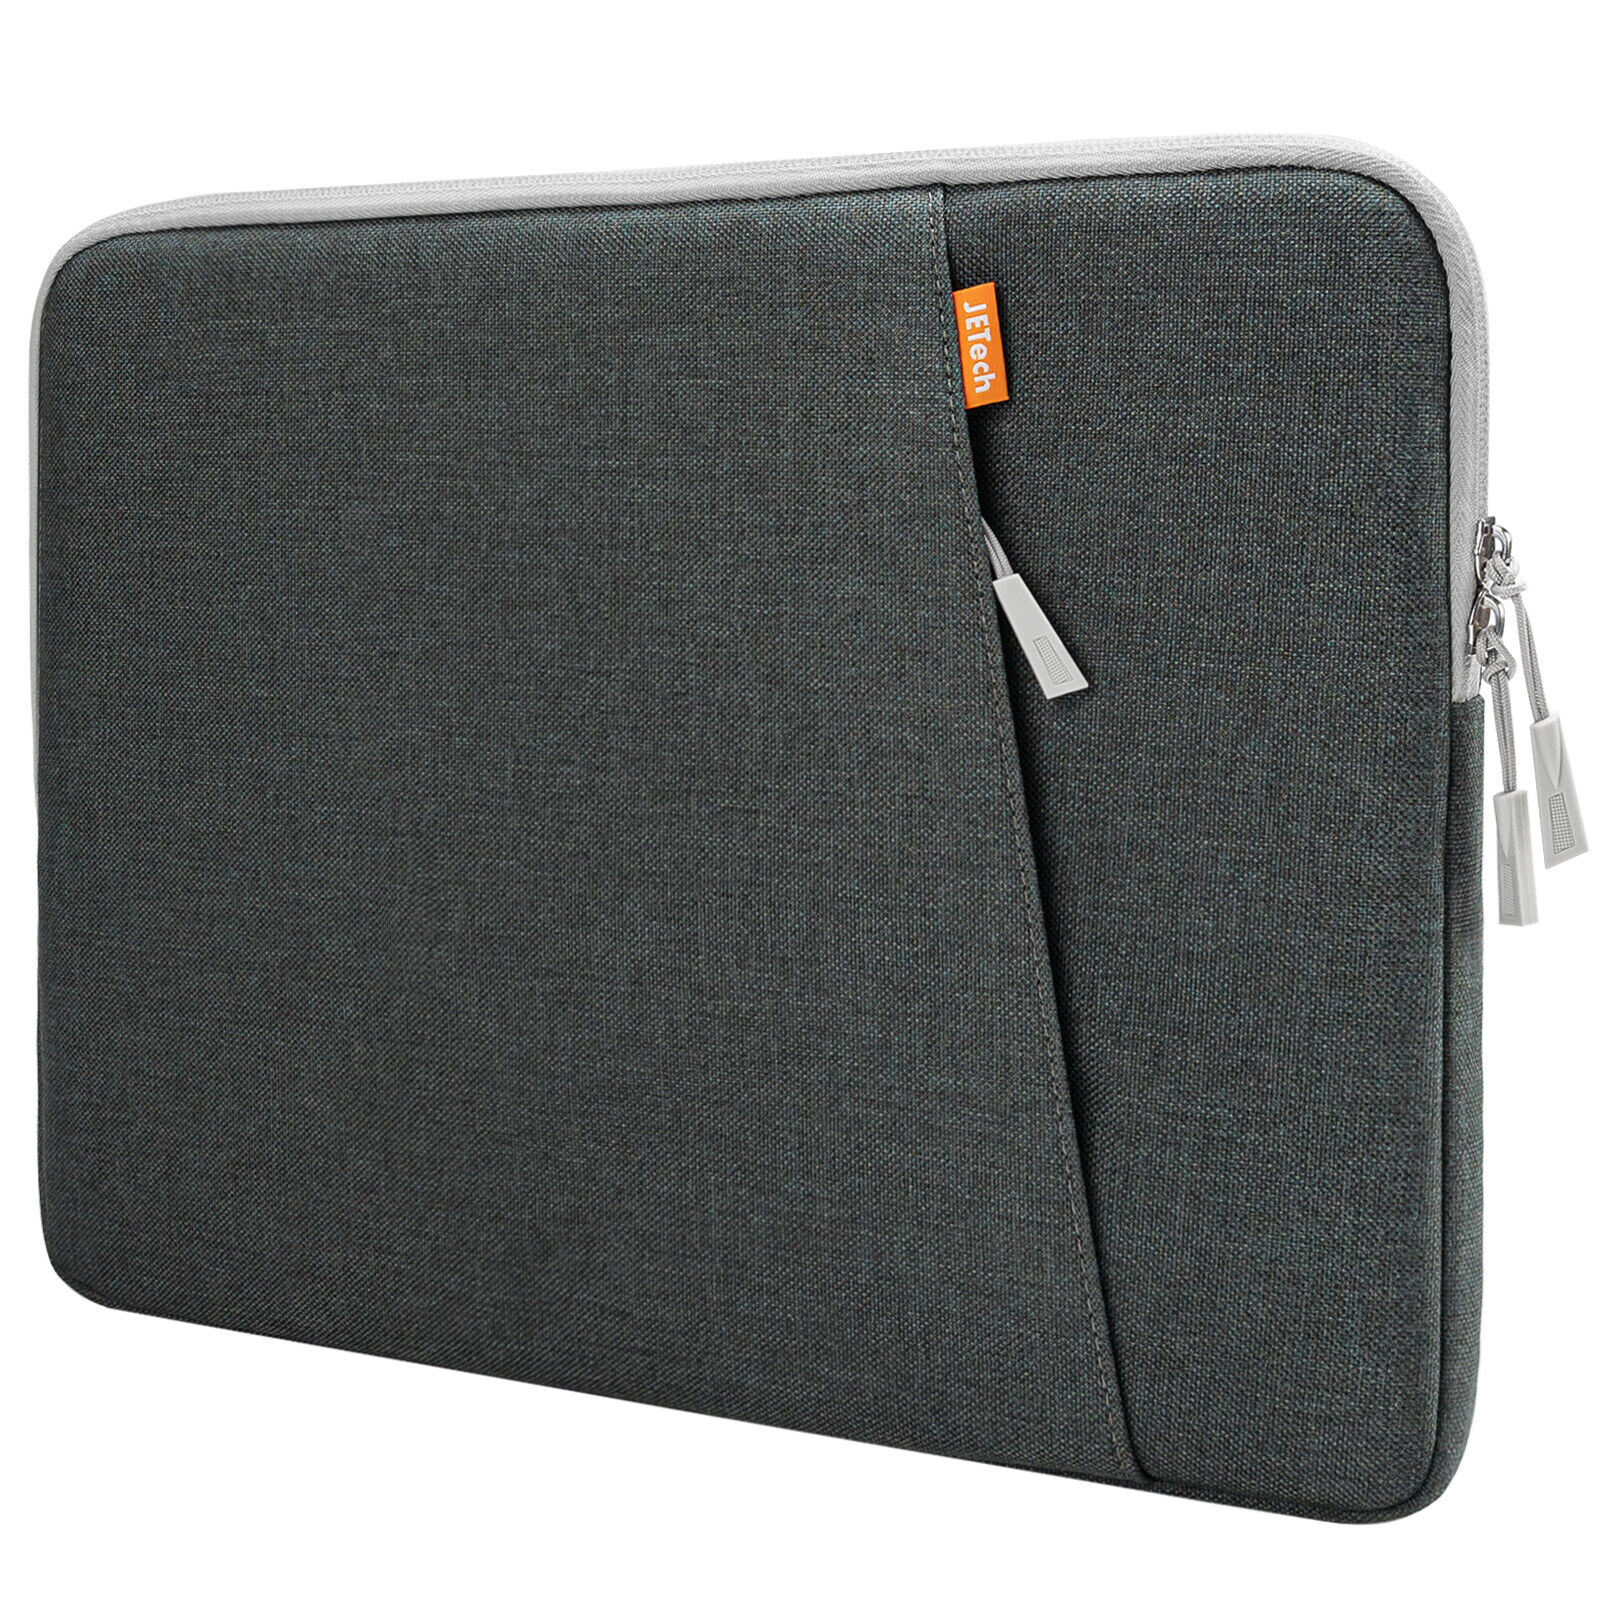 JETech Laptop Sleeve for 12/13/15 Inches Notebook Tablet iPad Tab with Pocket